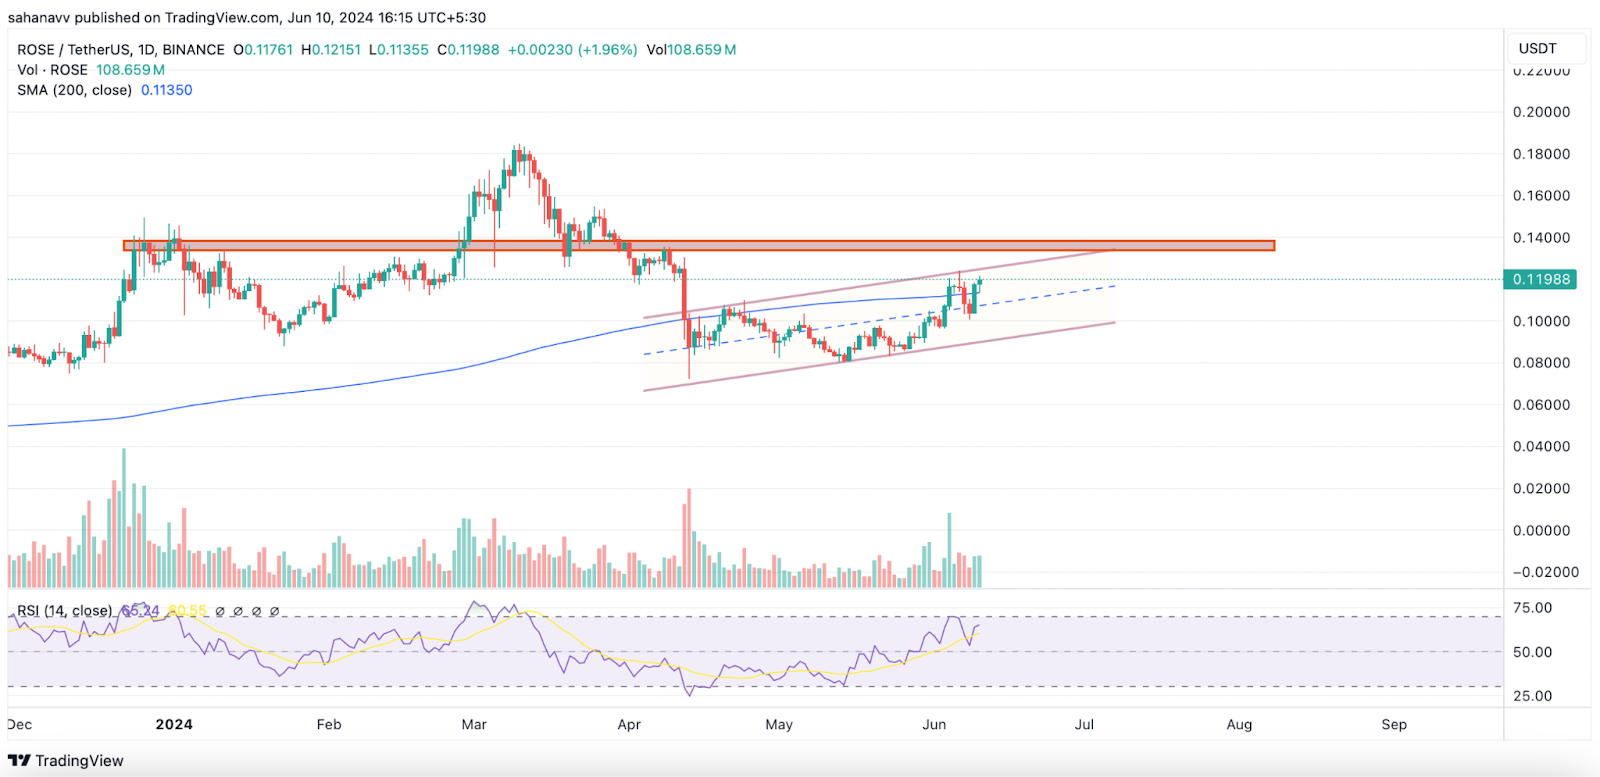 Altcoins Display Acute Strength: Mantra (OM) Price Reaches Highs While Oasis (ROSE) Record Huge Gains